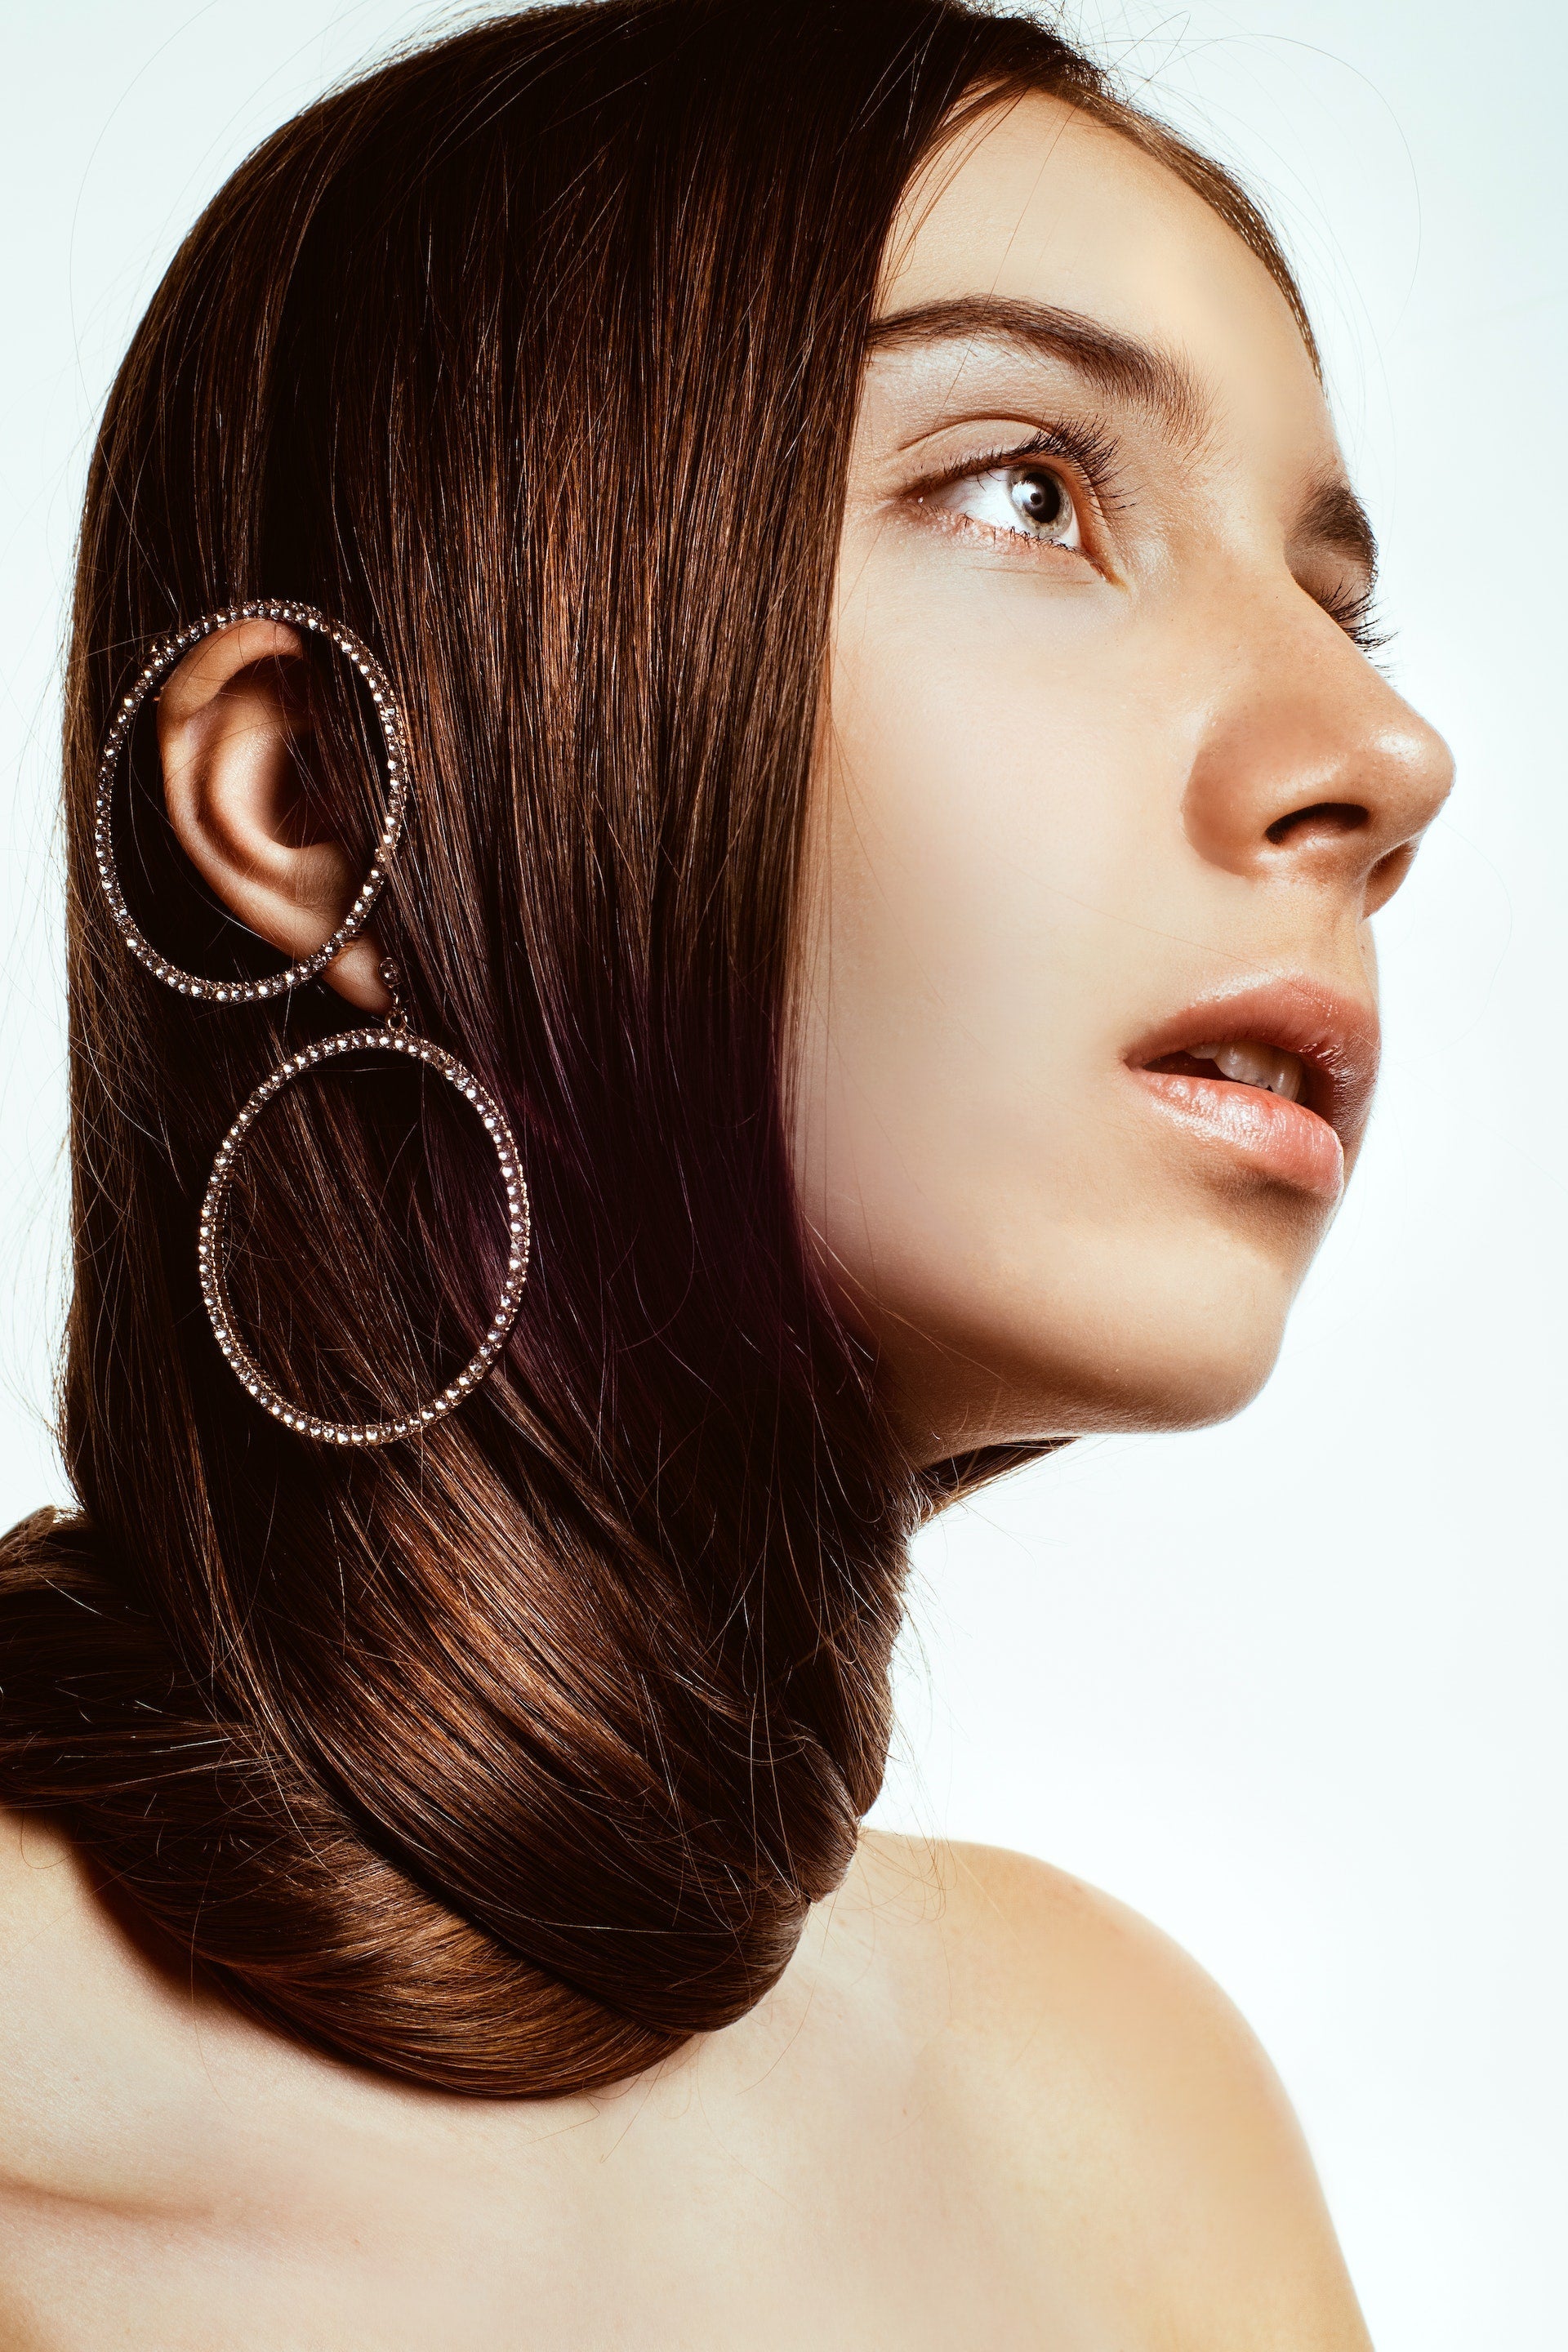 Make a bold statement with a dangle earring. Each earring hangs from the lobe and features a charm or gemstone that dangles freely, providing a sophisticated yet modern touch to your look. Perfect for any occasion.